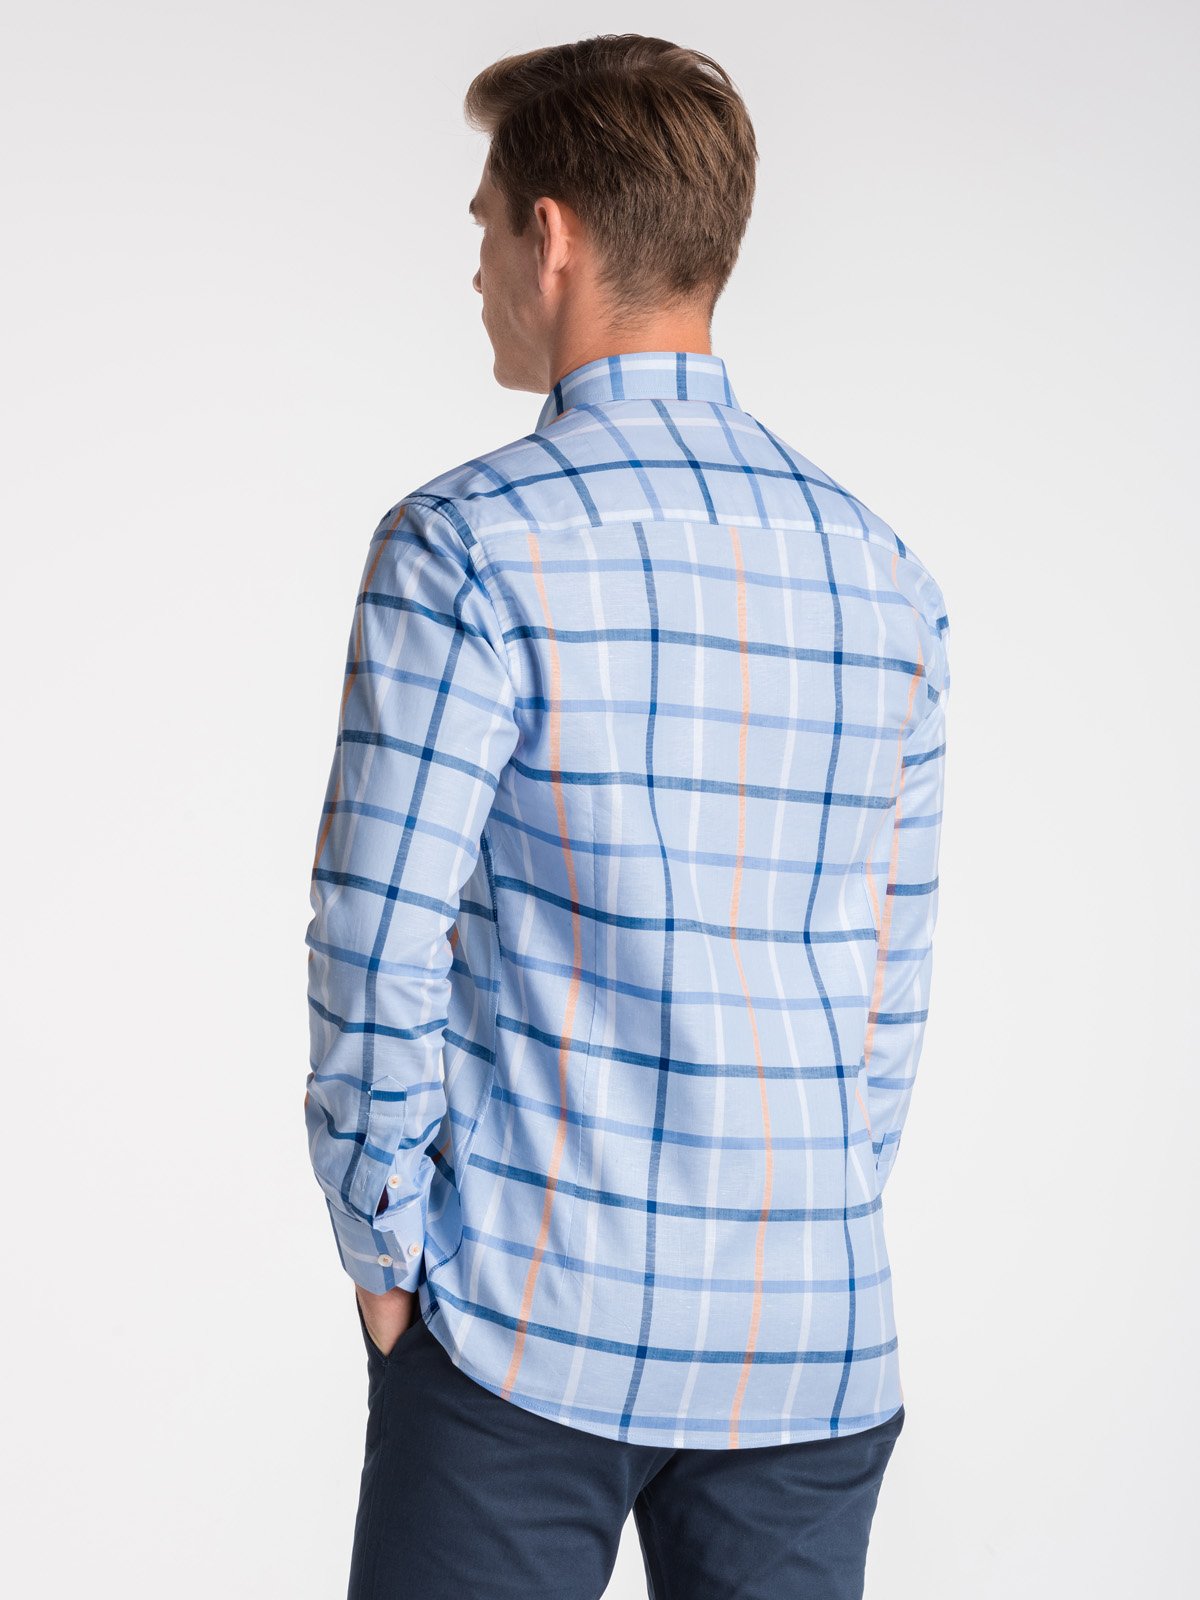 Men's shirt with long sleeves K493 - light blue | MODONE wholesale ...